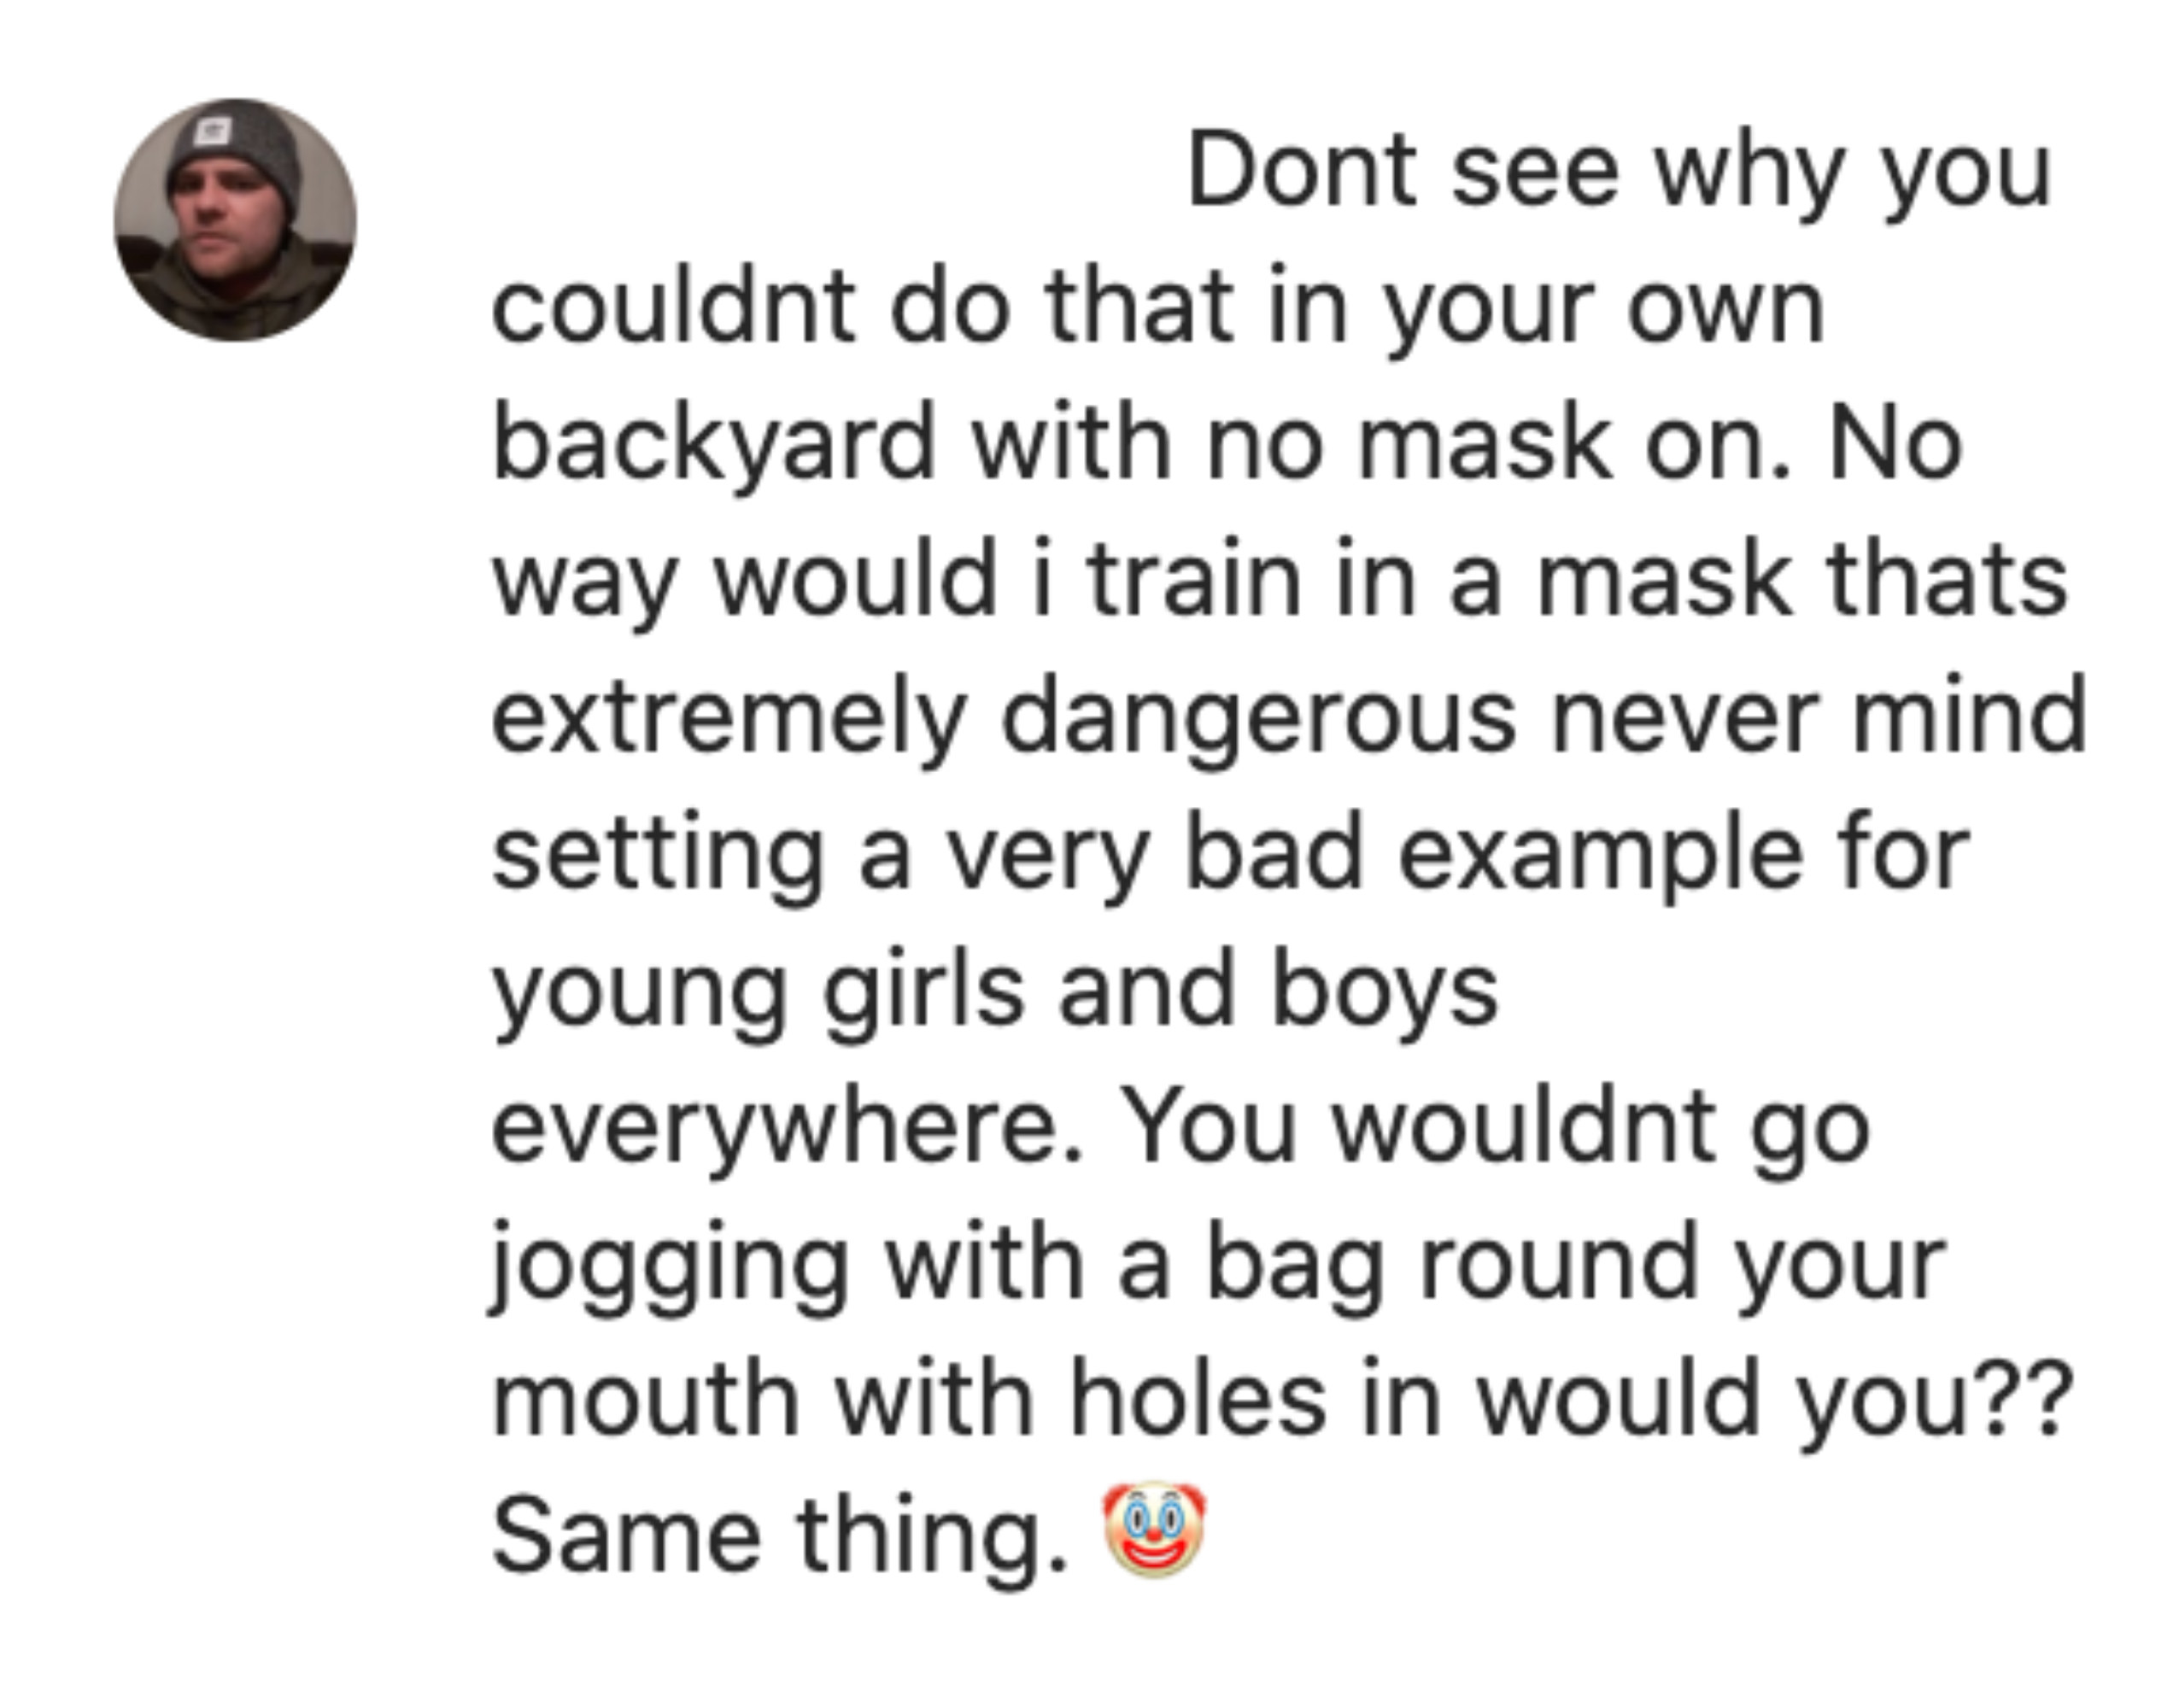 Comment reading, &quot;Don&#x27;t see why you couldn&#x27;t do that in your own backyard with no mask on. No way would I train in a mask. That&#x27;s extremely dangerous, never mind setting a very bad example for young girls and boys everywhere.&quot;